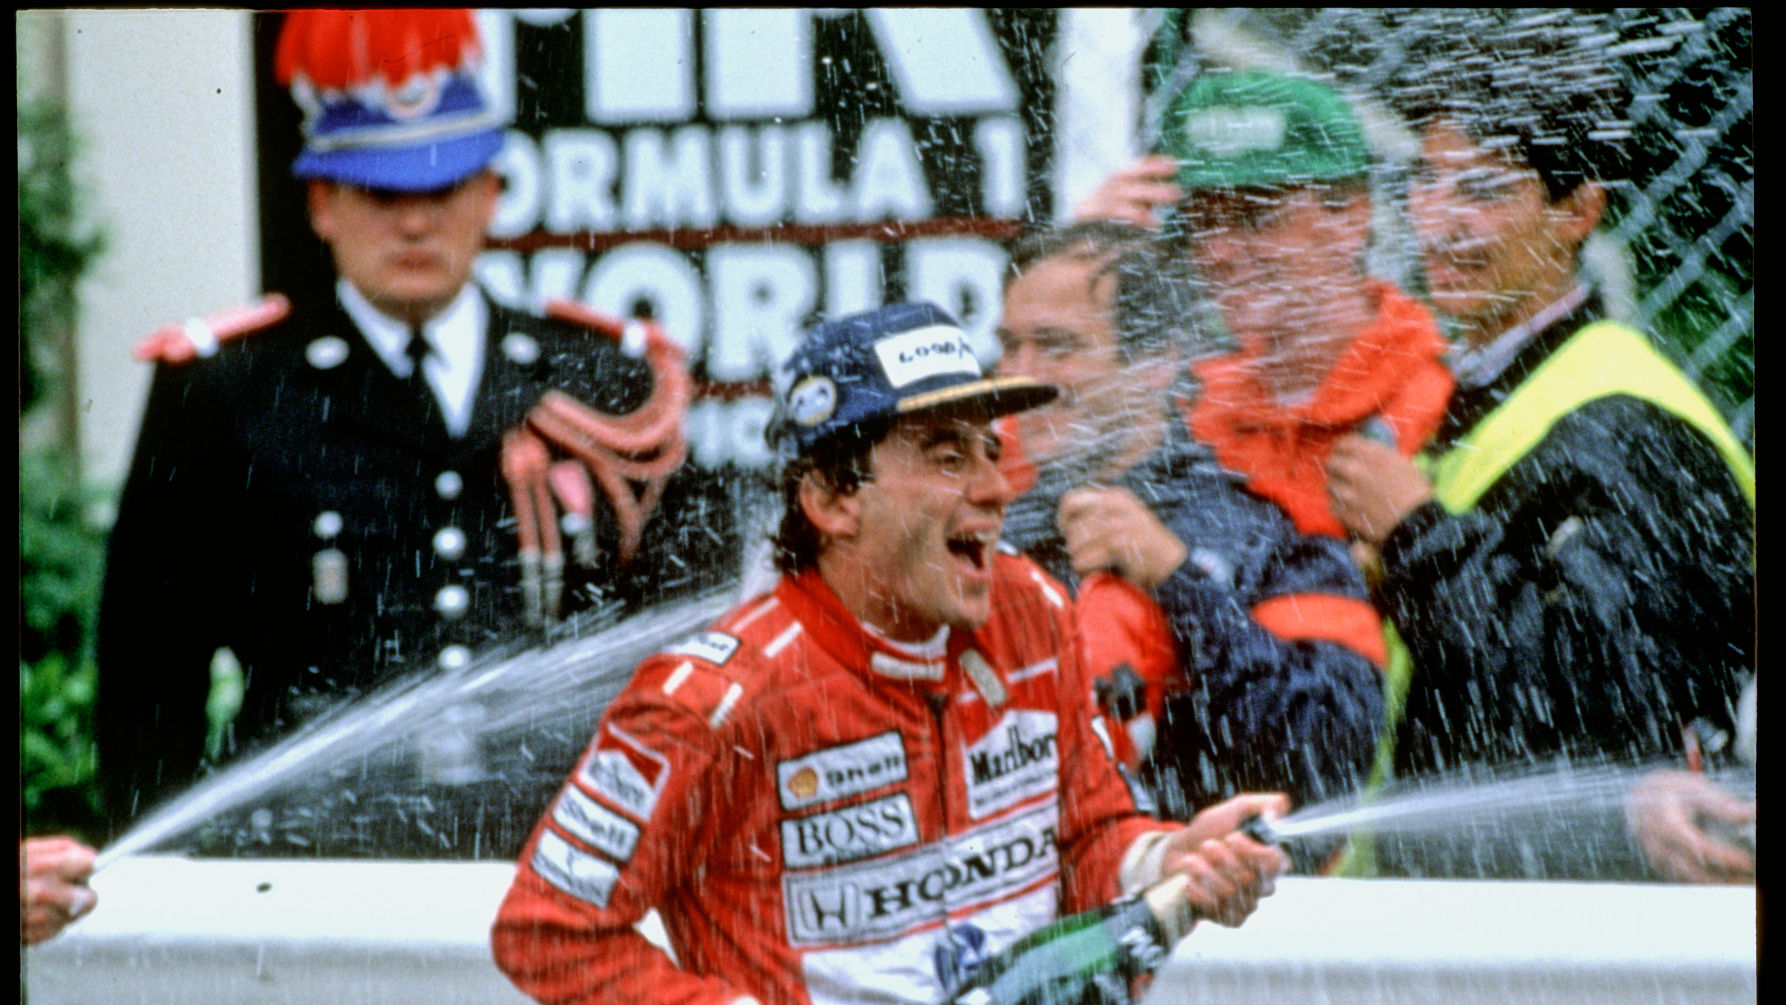 1991 - Ayrton dominated his way to a fourth victory in 1991. Photographer Credit Norio Koike